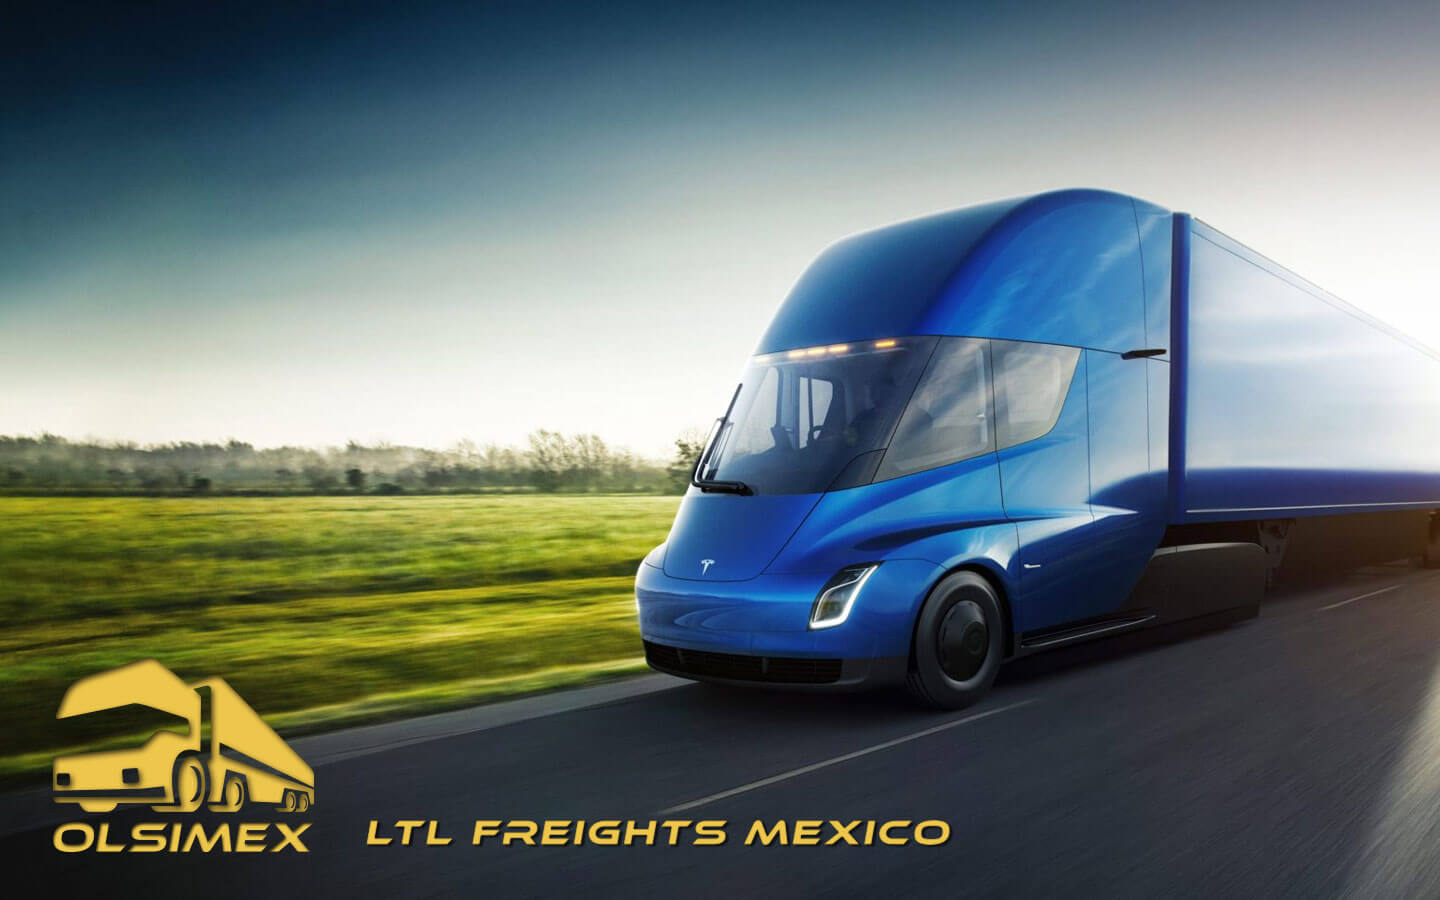 LTL Freights Mexico